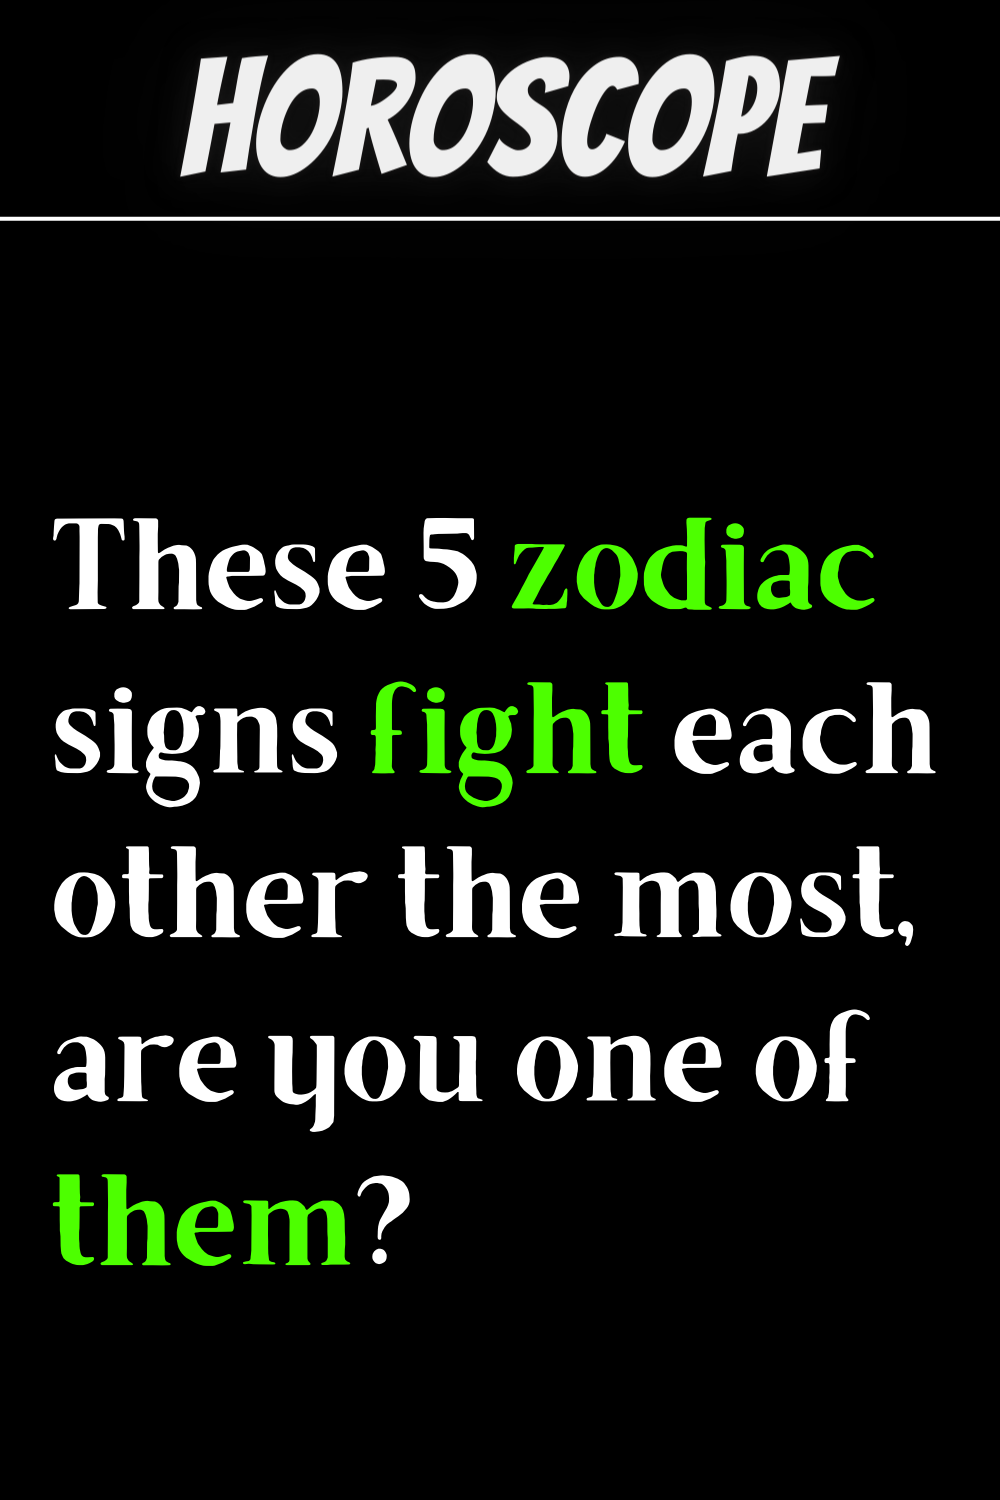 These 5 zodiac signs fight each other the most, are you one of them?